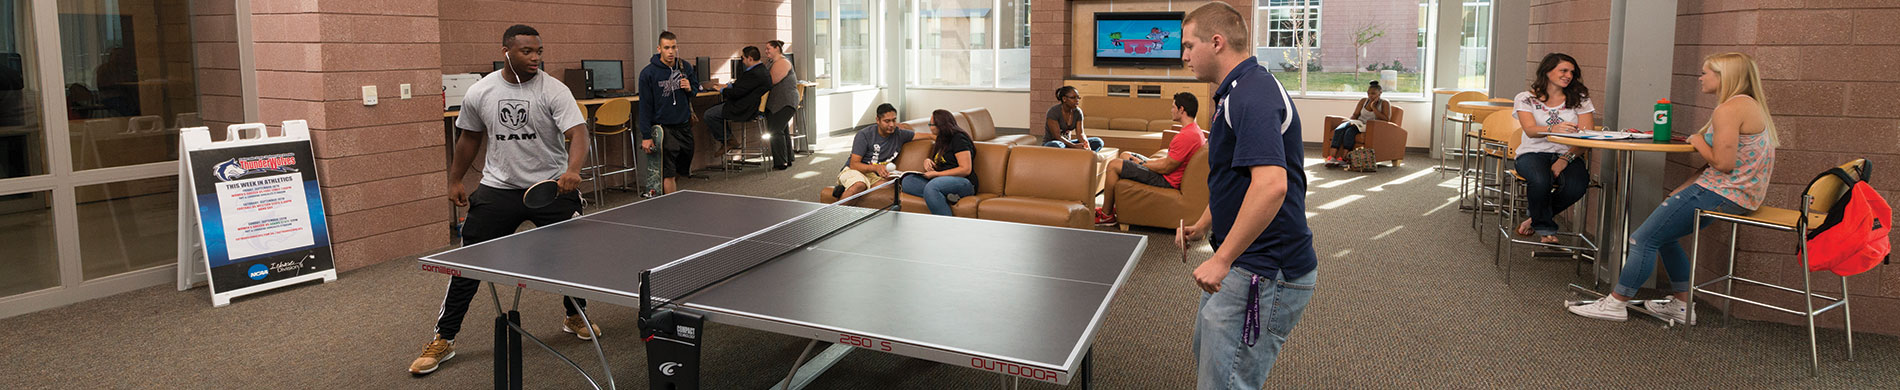 Students playing ping pong in the Culebra Lobby